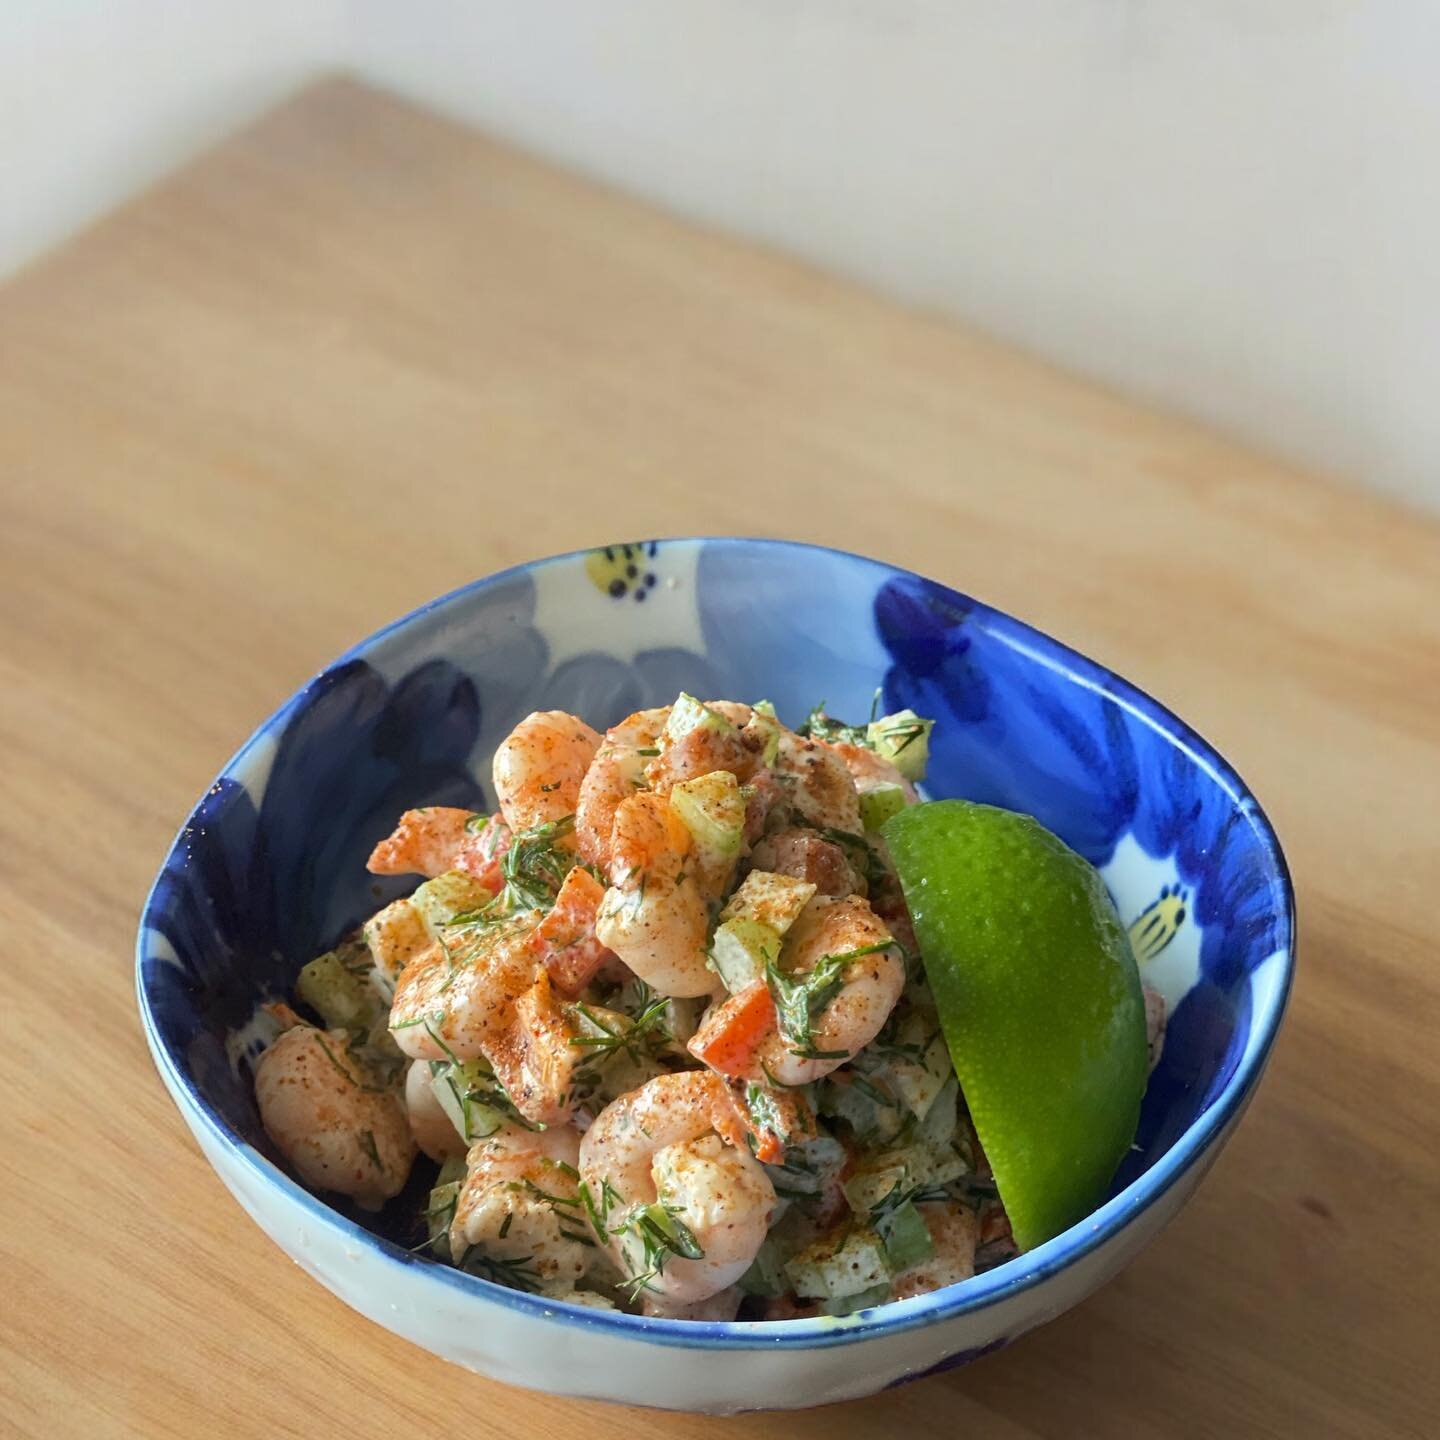 Absolutely delicious prawn salad. 
Very simple to make. We got inspired by 

Cook your prawns in water with cayenne pepper, garlic, bay leave, lemon juice, salt. When ready let them cool down. 

Dress prawns with chopped spring onions, dill, bell pep